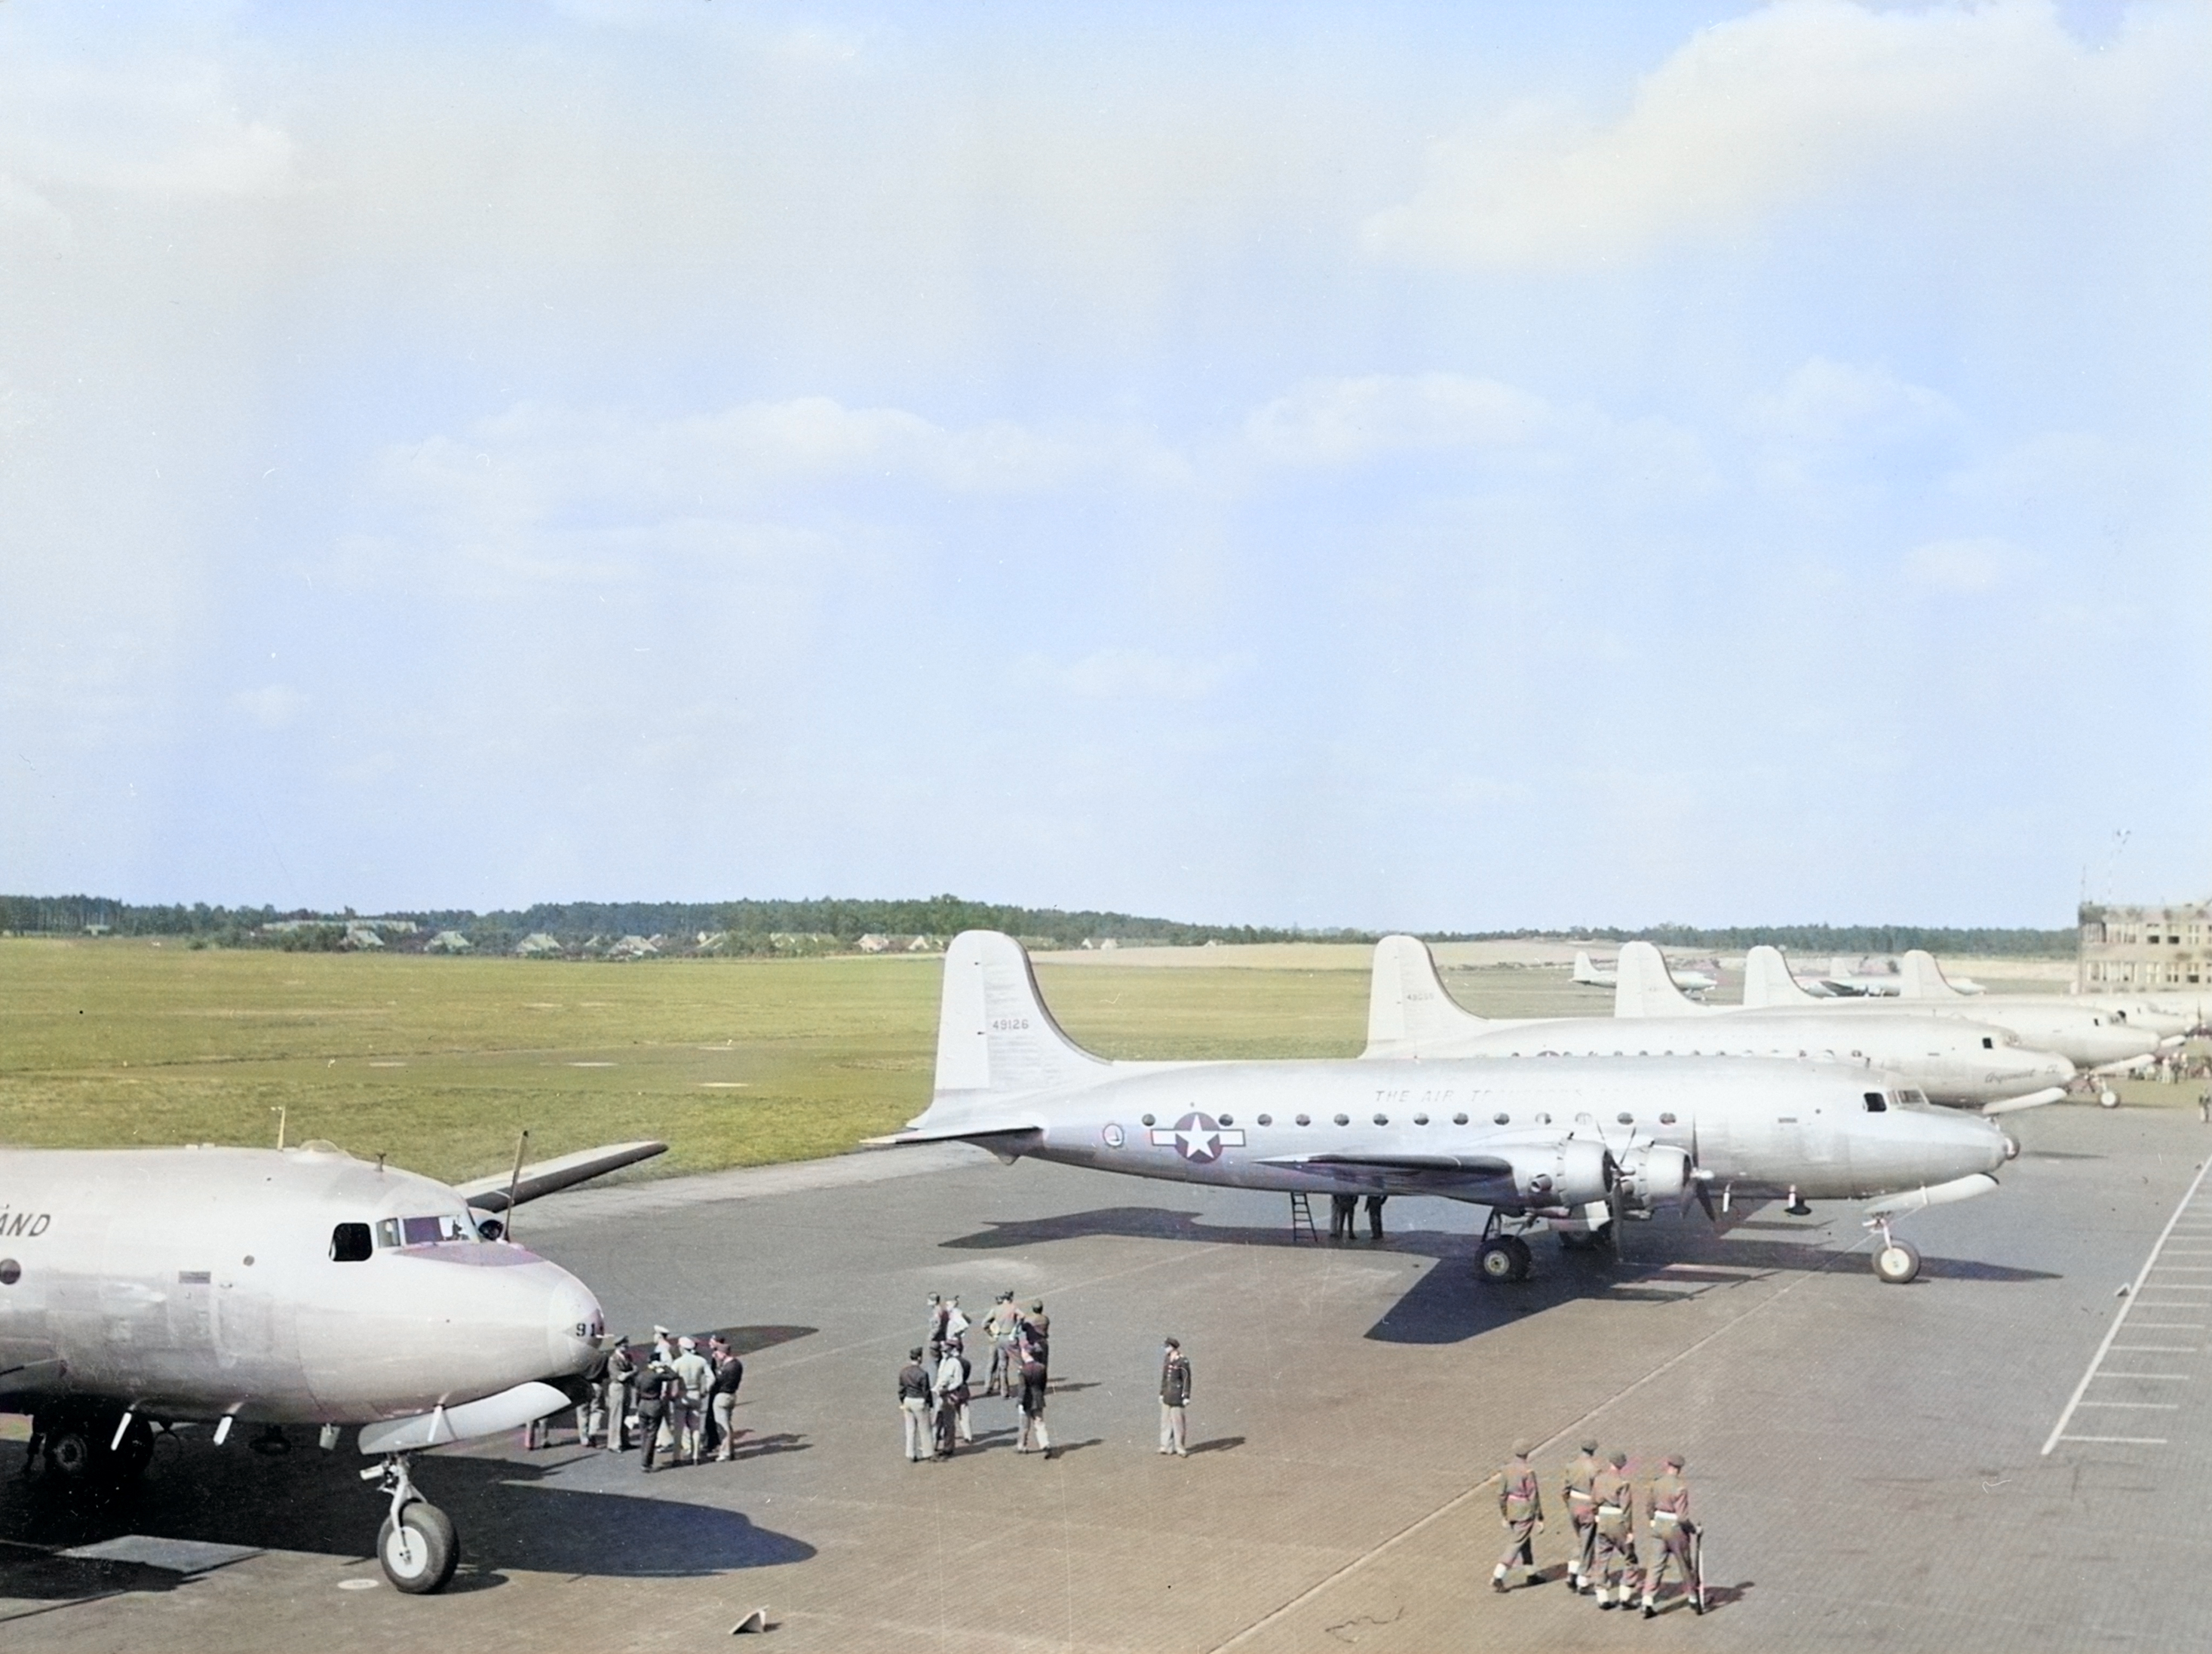 US C-54 Skymaster aircraft at the Berlin-Gatow airfield, Germany, 15 Jul 1945; these aircraft brought Harry Truman and other US leaders to Berlin for the Potsdam Conference [Colorized by WW2DB]